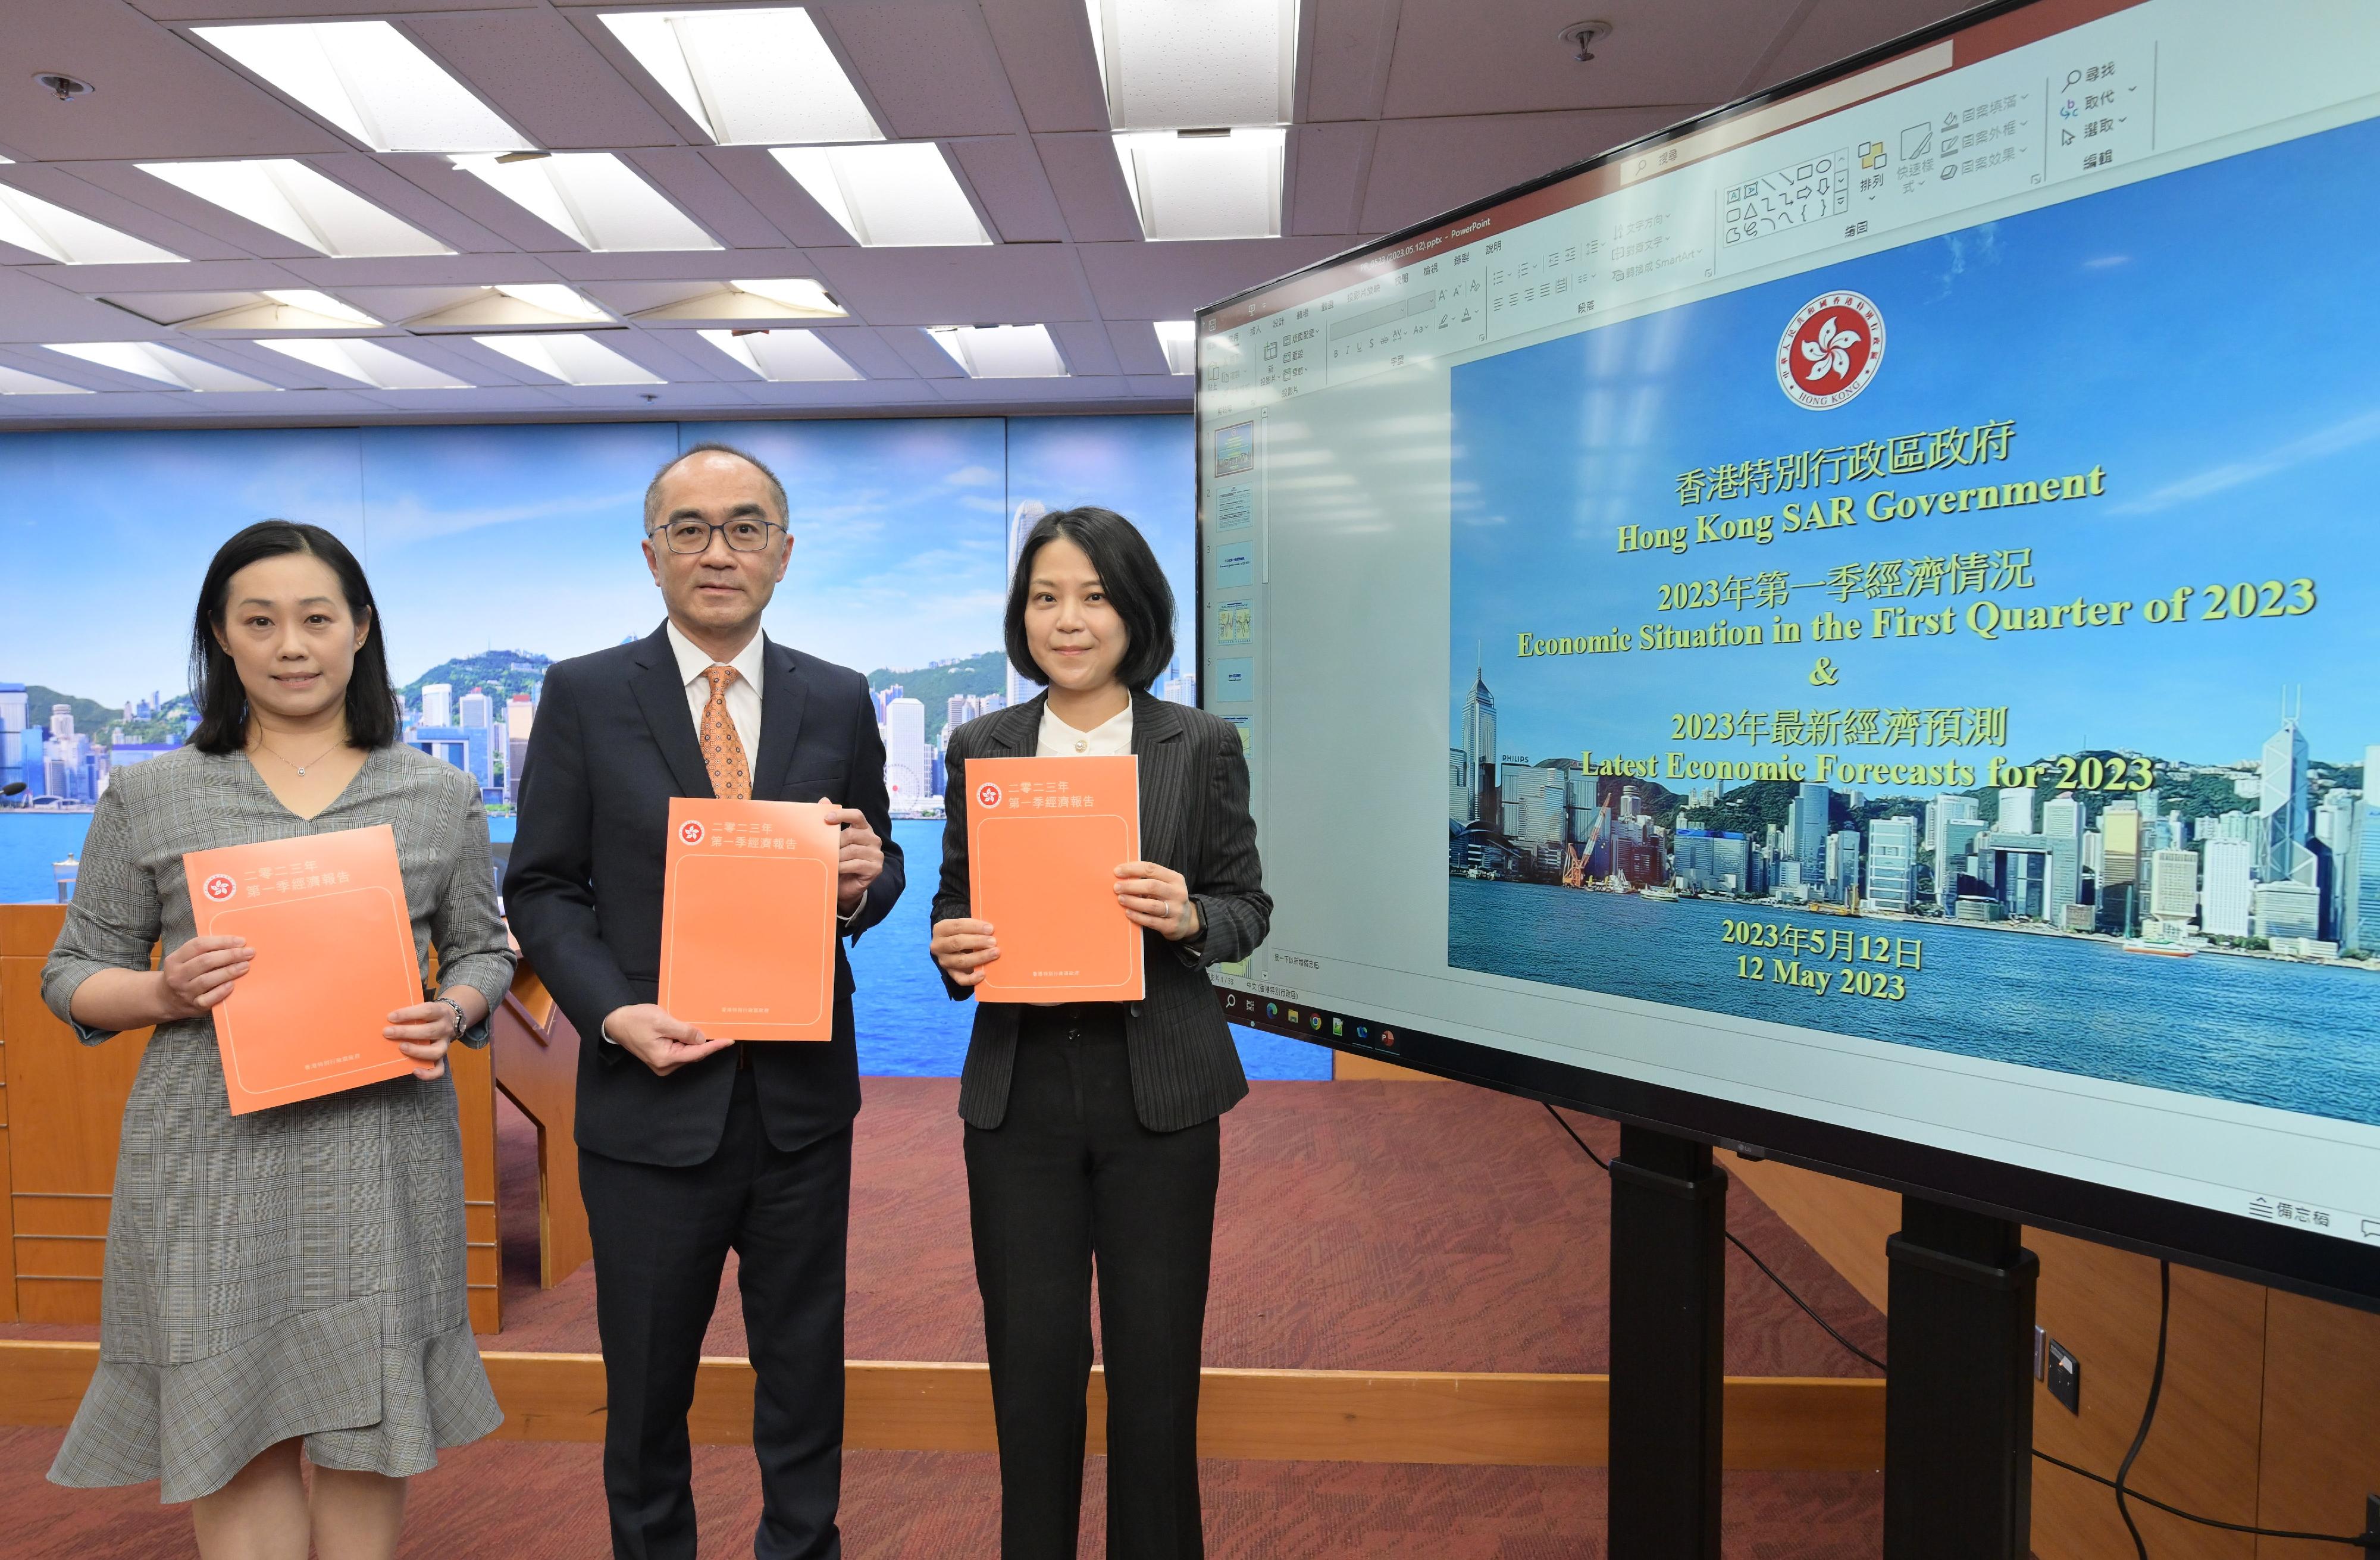 The Government Economist, Mr Adolph Leung (centre), presented the First Quarter Economic Report 2023 at a press conference today (May 12). Also present are Principal Economist Ms Joyce Cheung (left) and Assistant Commissioner for Census and Statistics Ms Edith Chan (right).